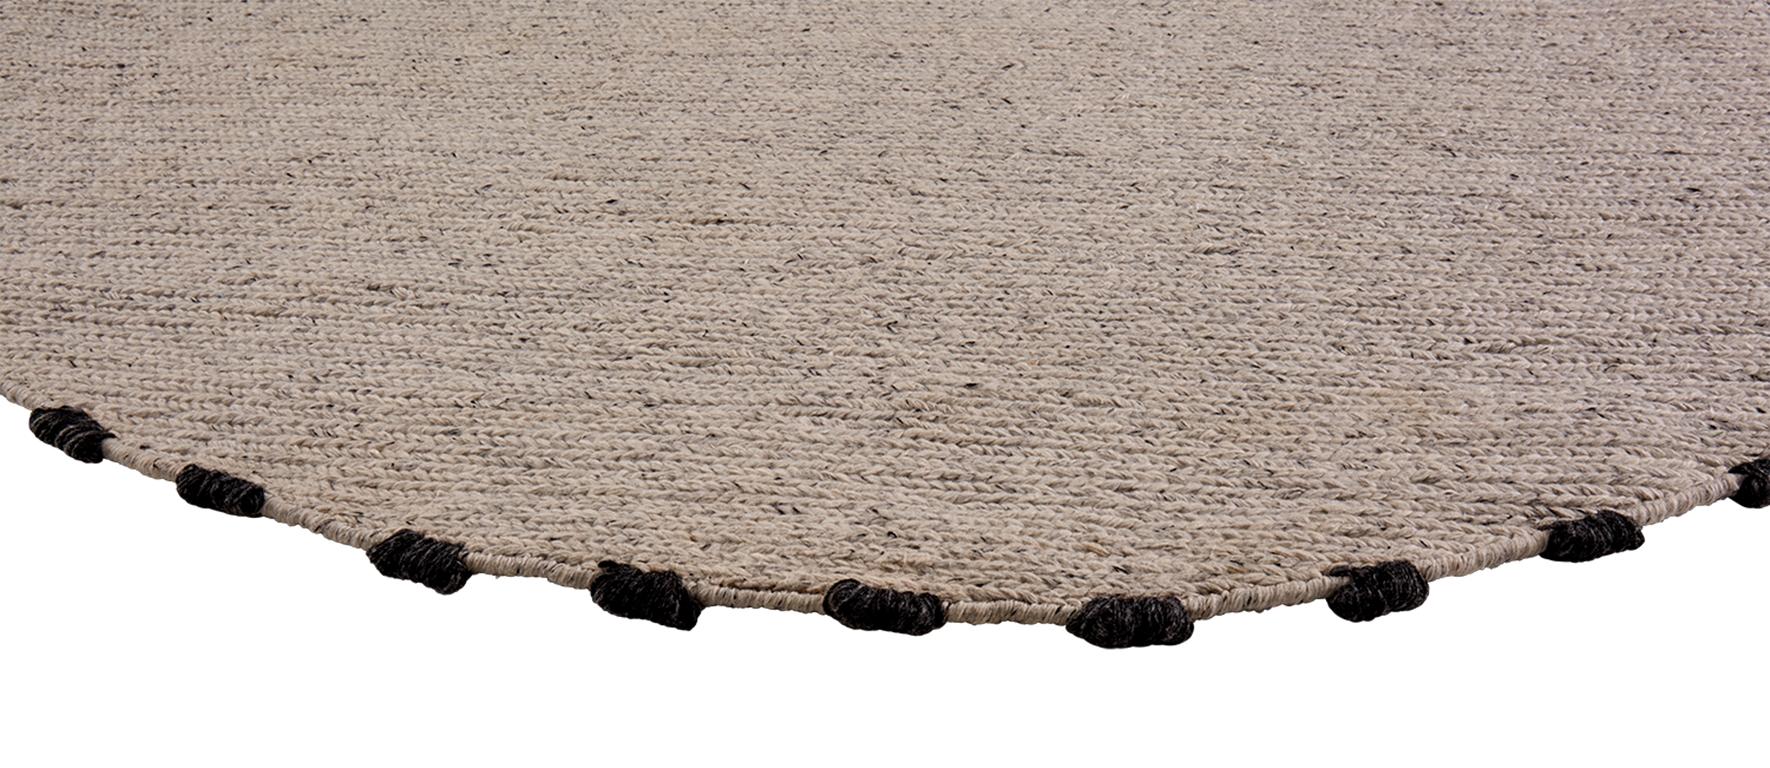 Nepalese 'Brish' 100% PET Outdoor and Indoor Rug: Stylishly Hand-Woven, 350 cm For Sale